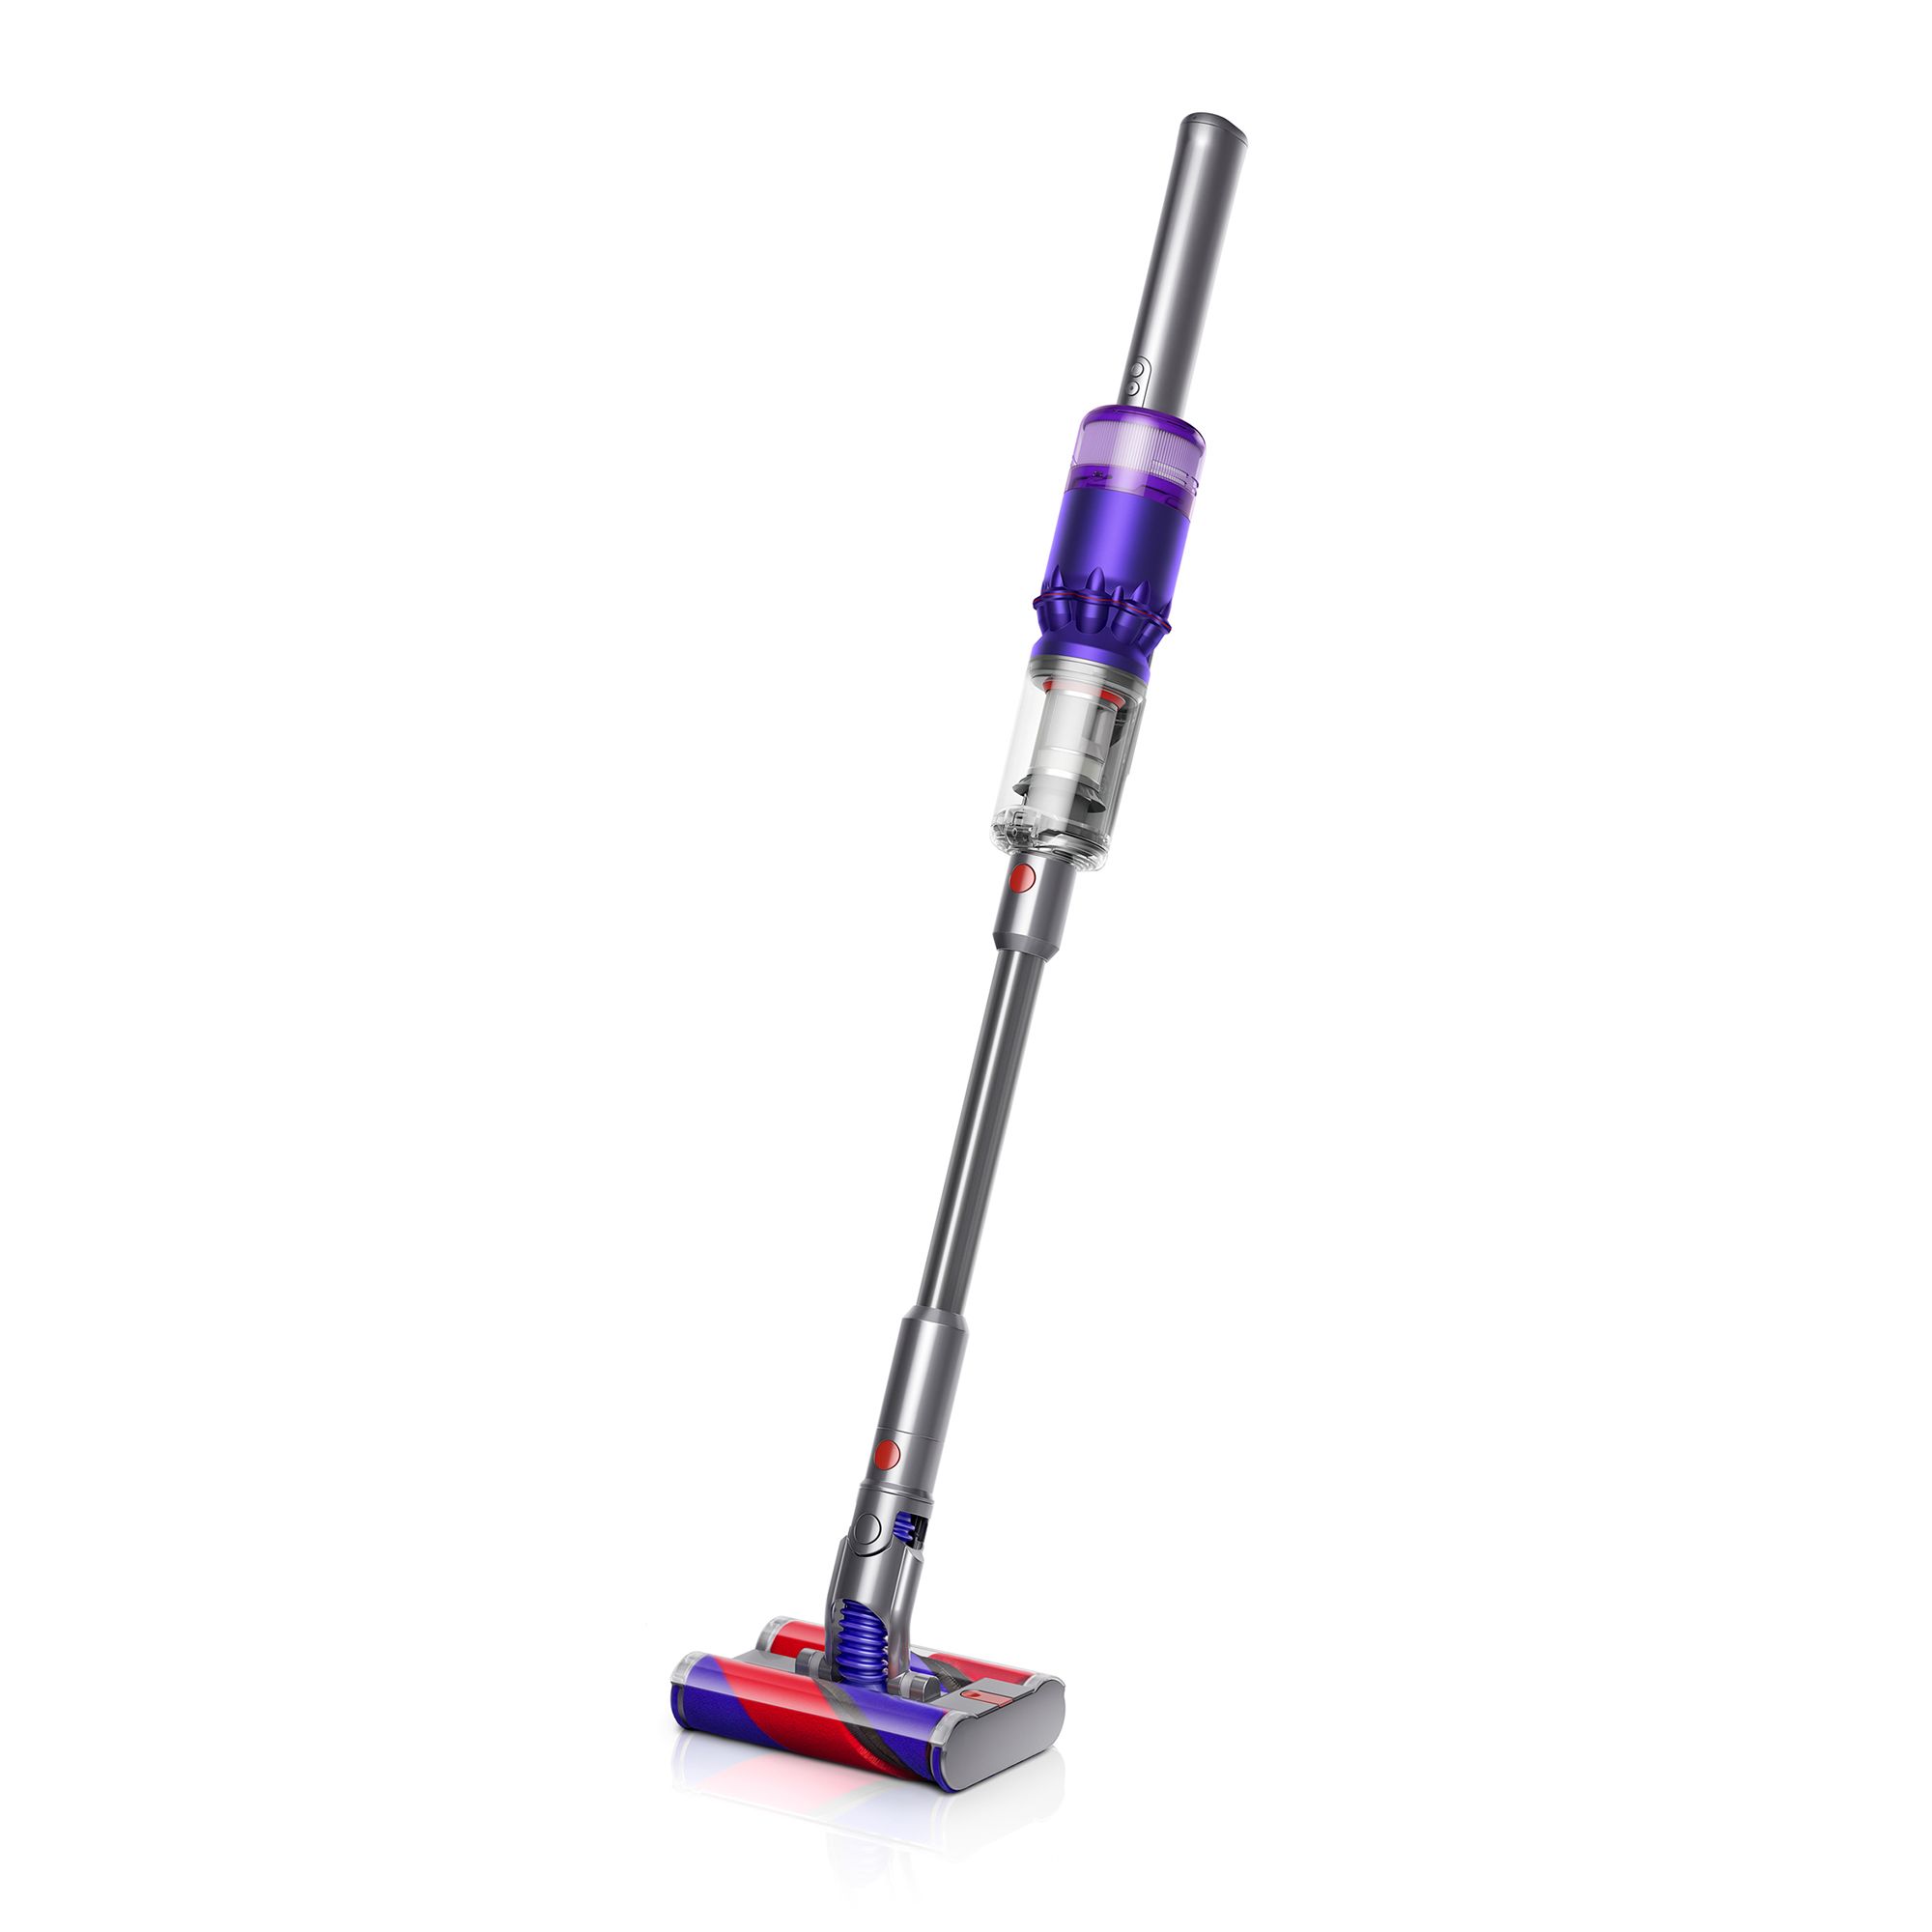 The Best 8 Dyson Vacuums In 2021, Best Dyson Cordless Vacuum For Hardwood Floors